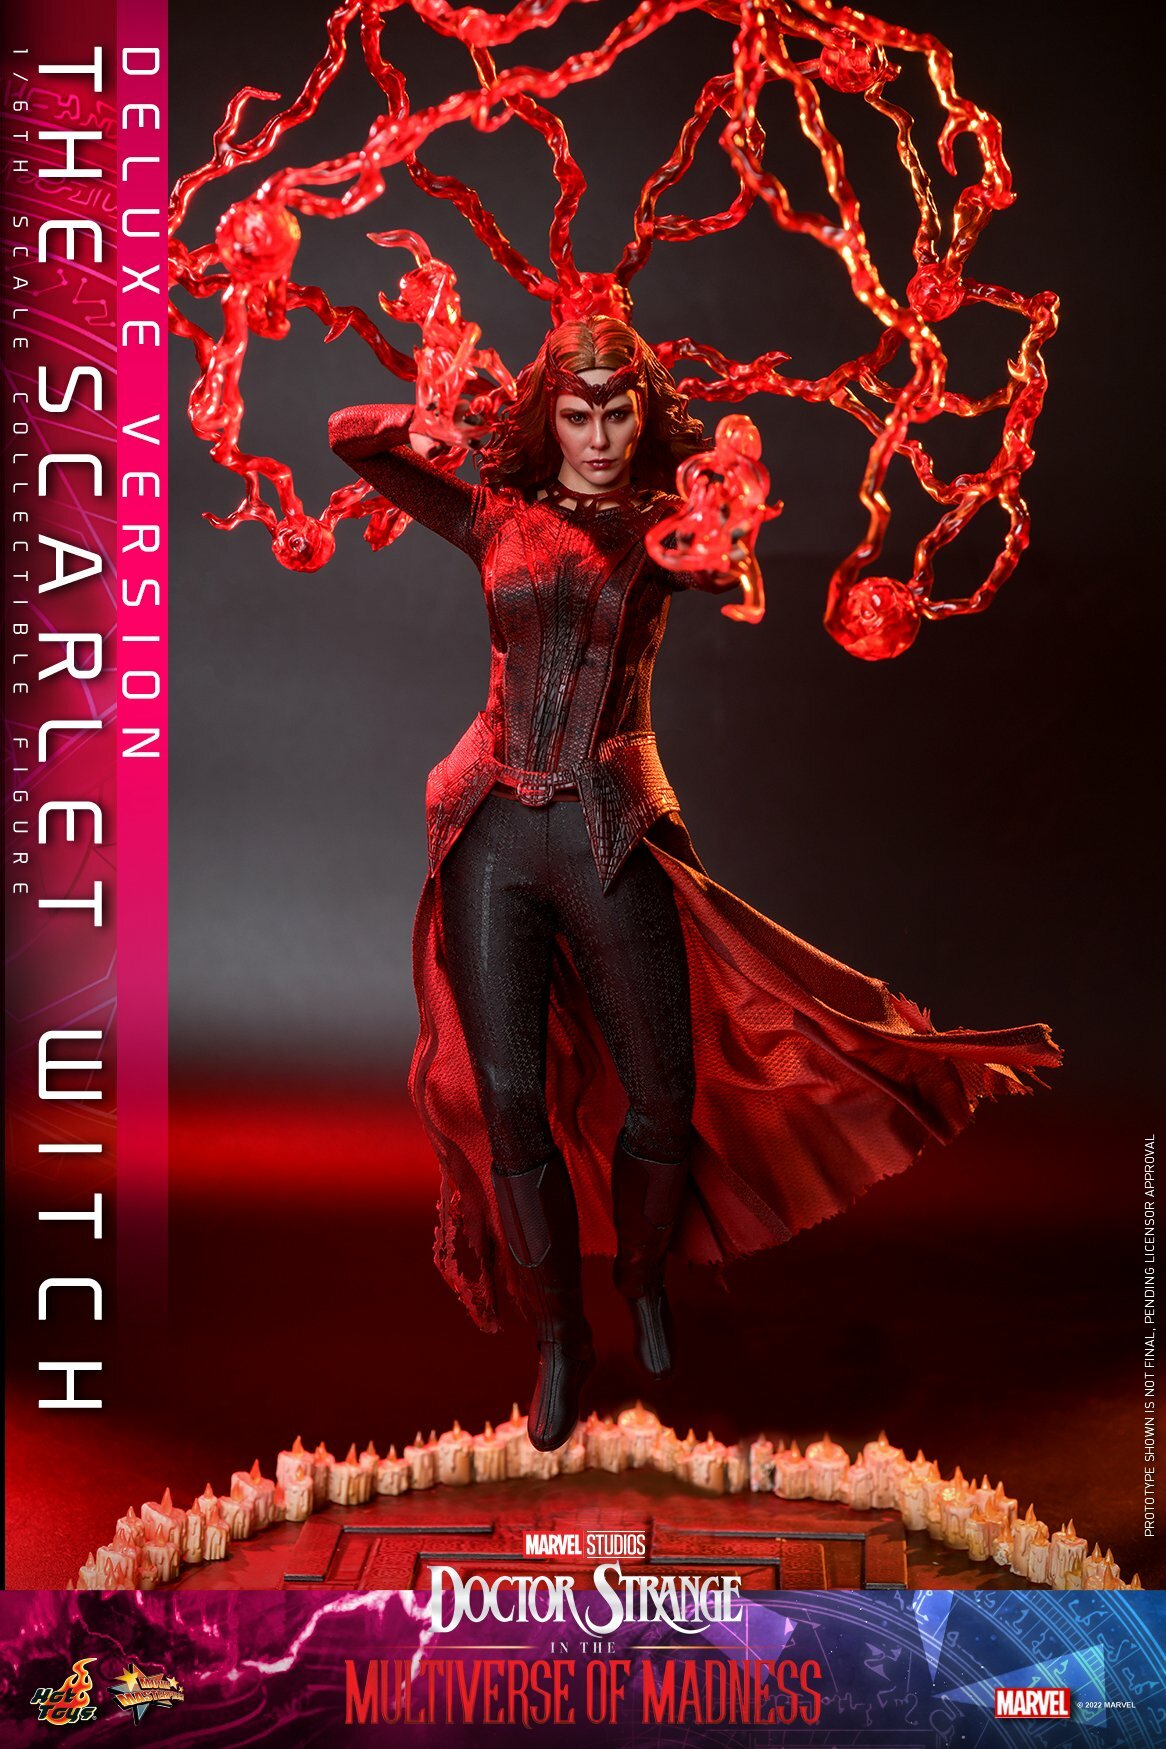 Hot-Toy-Multiverse-of-Madness-Scarlet-Witch-DX-004.jpg.8f89d78a6cd7c1bb834f4848a3018ec8.jpg